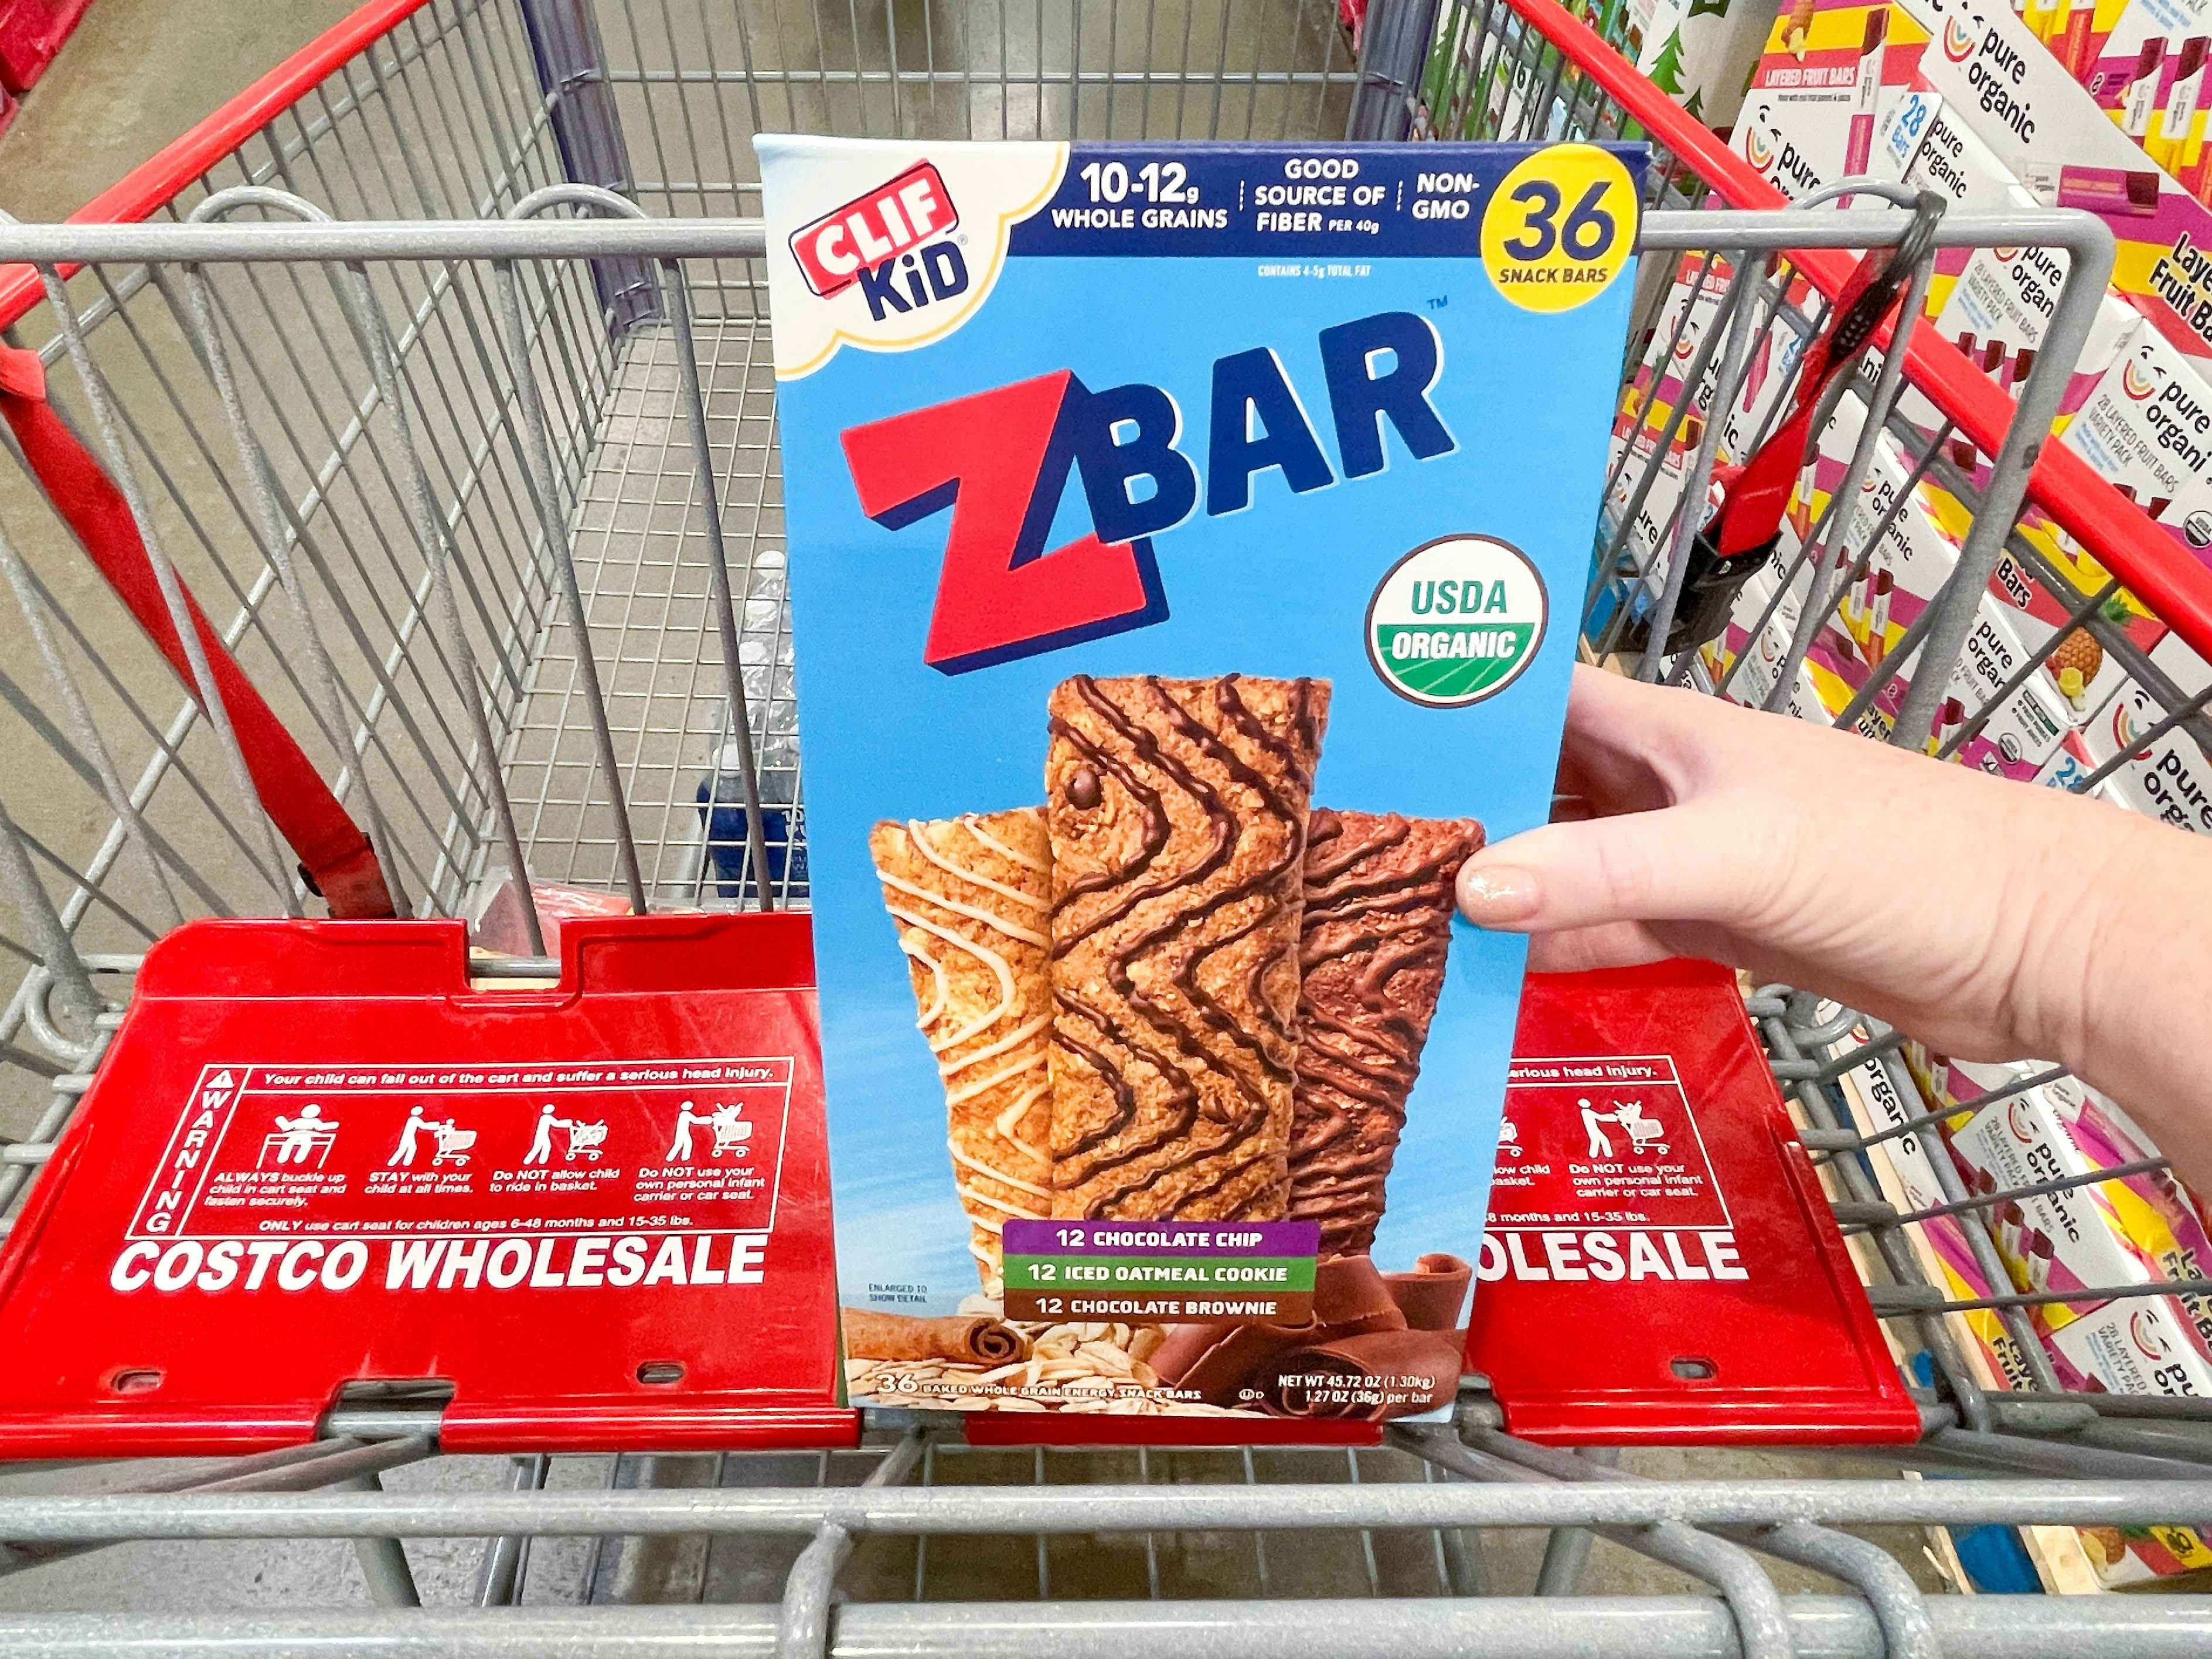 a package of zbar being held in store